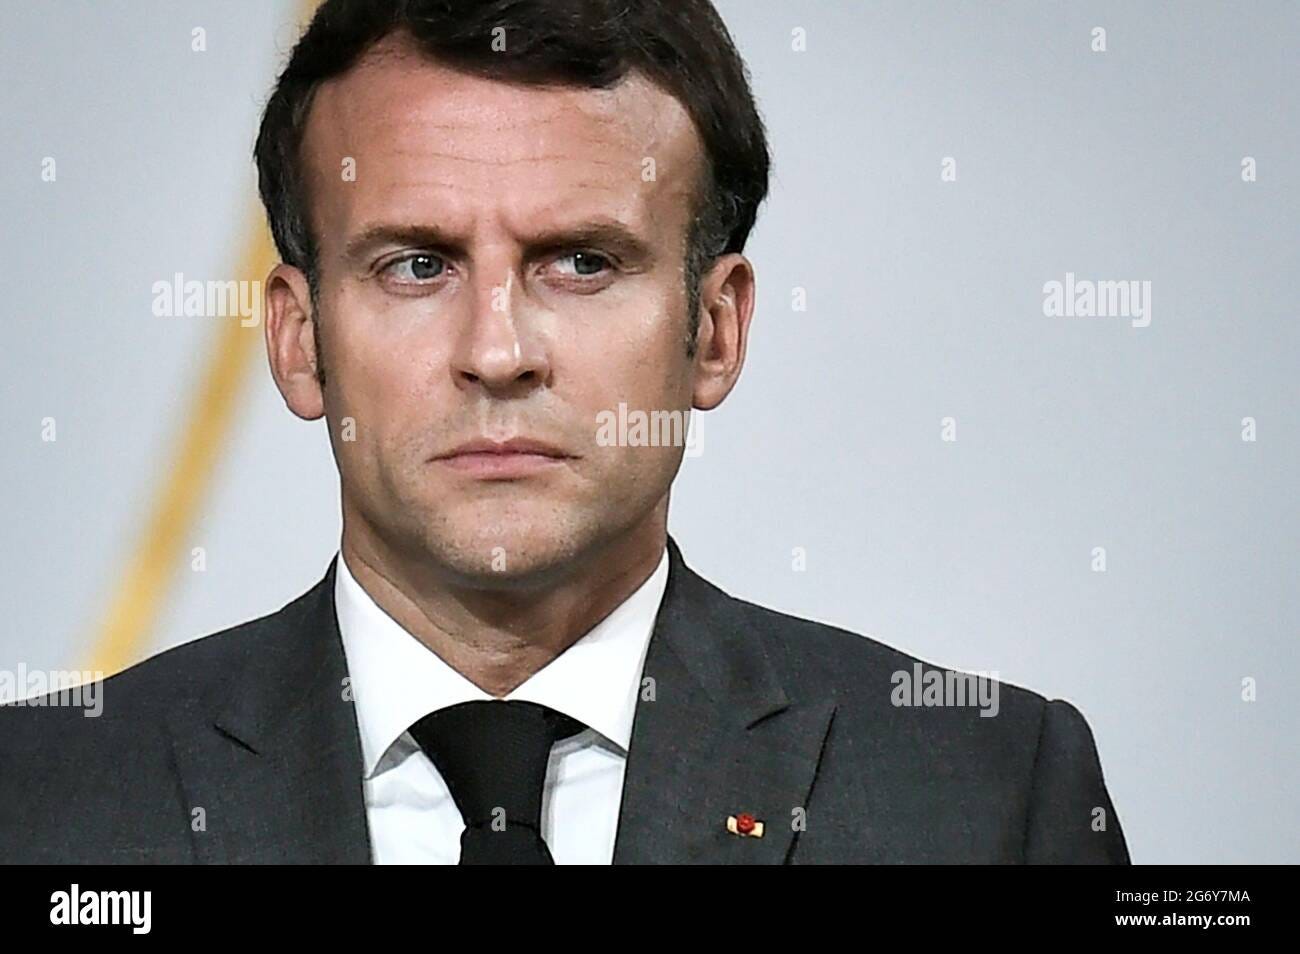 French President Emmanuel Macron reacts during a joint press conference  with Niger's President Mohamed Bazoum following a video summit with leaders  of G5 Sahel countries, at the Elysee presidential Palace, in Paris